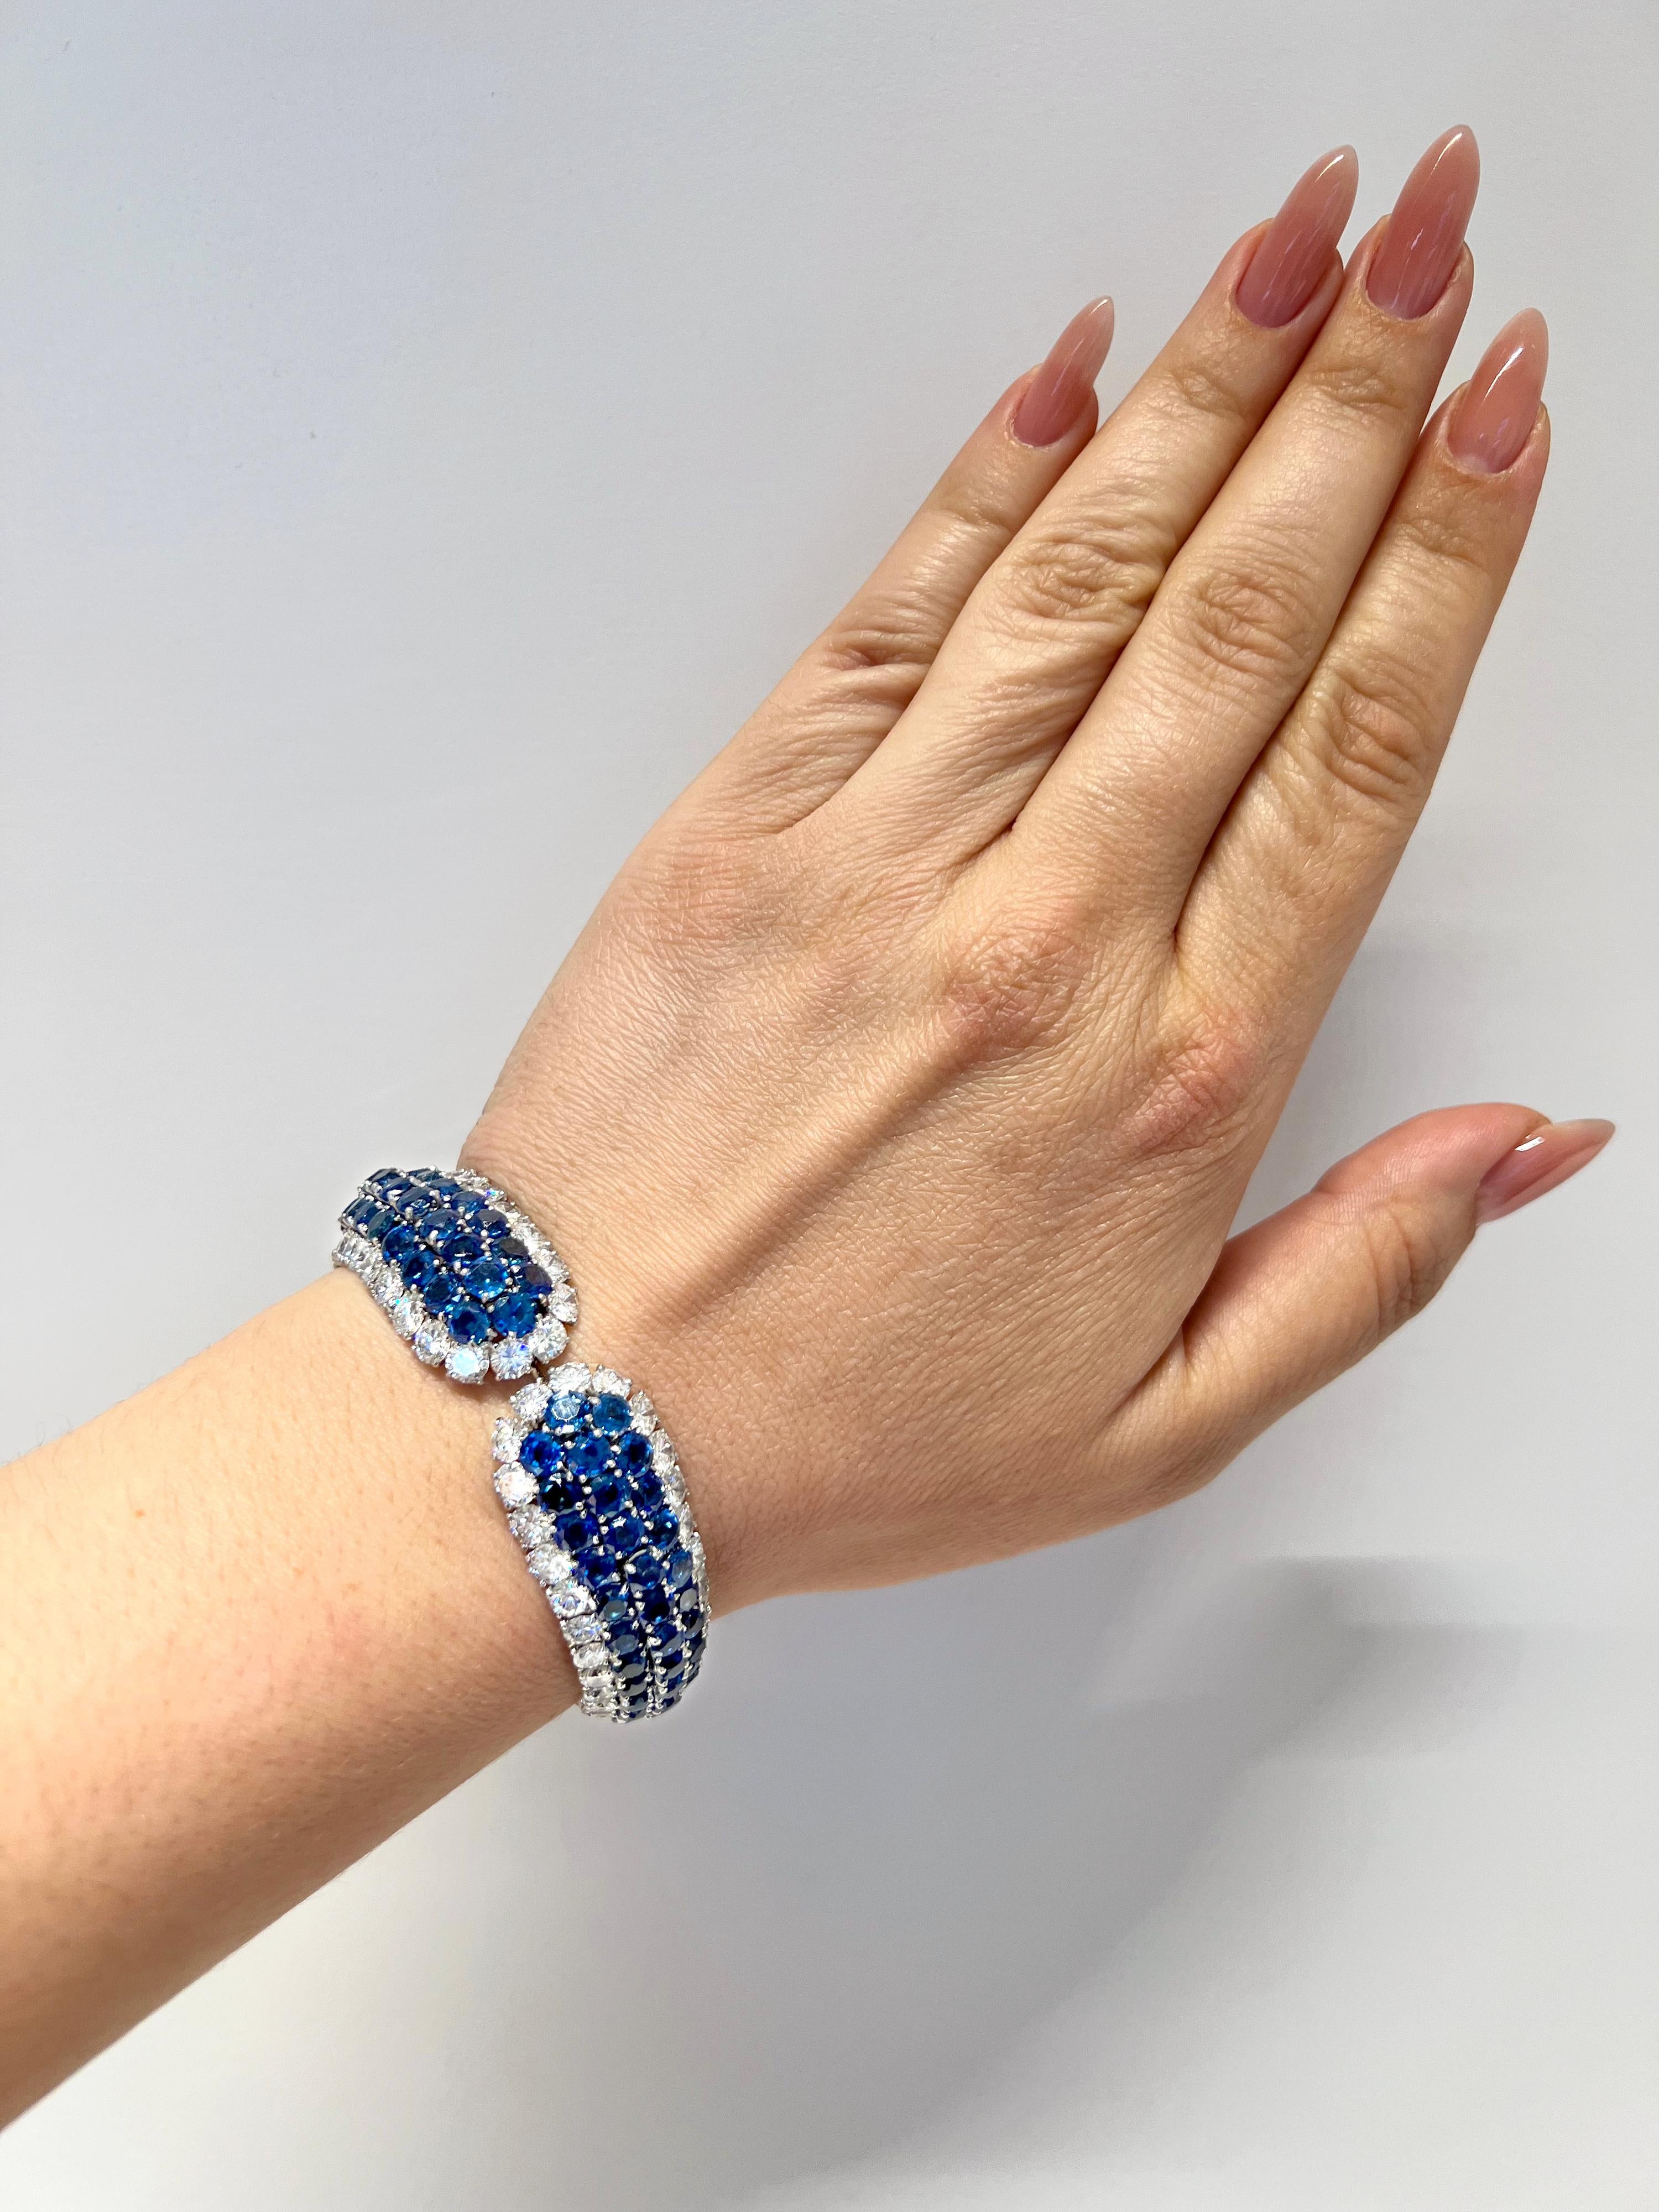 Van Cleef & Arpels Platinum Diamond & Sapphire Bracelet  In Excellent Condition For Sale In New York, NY